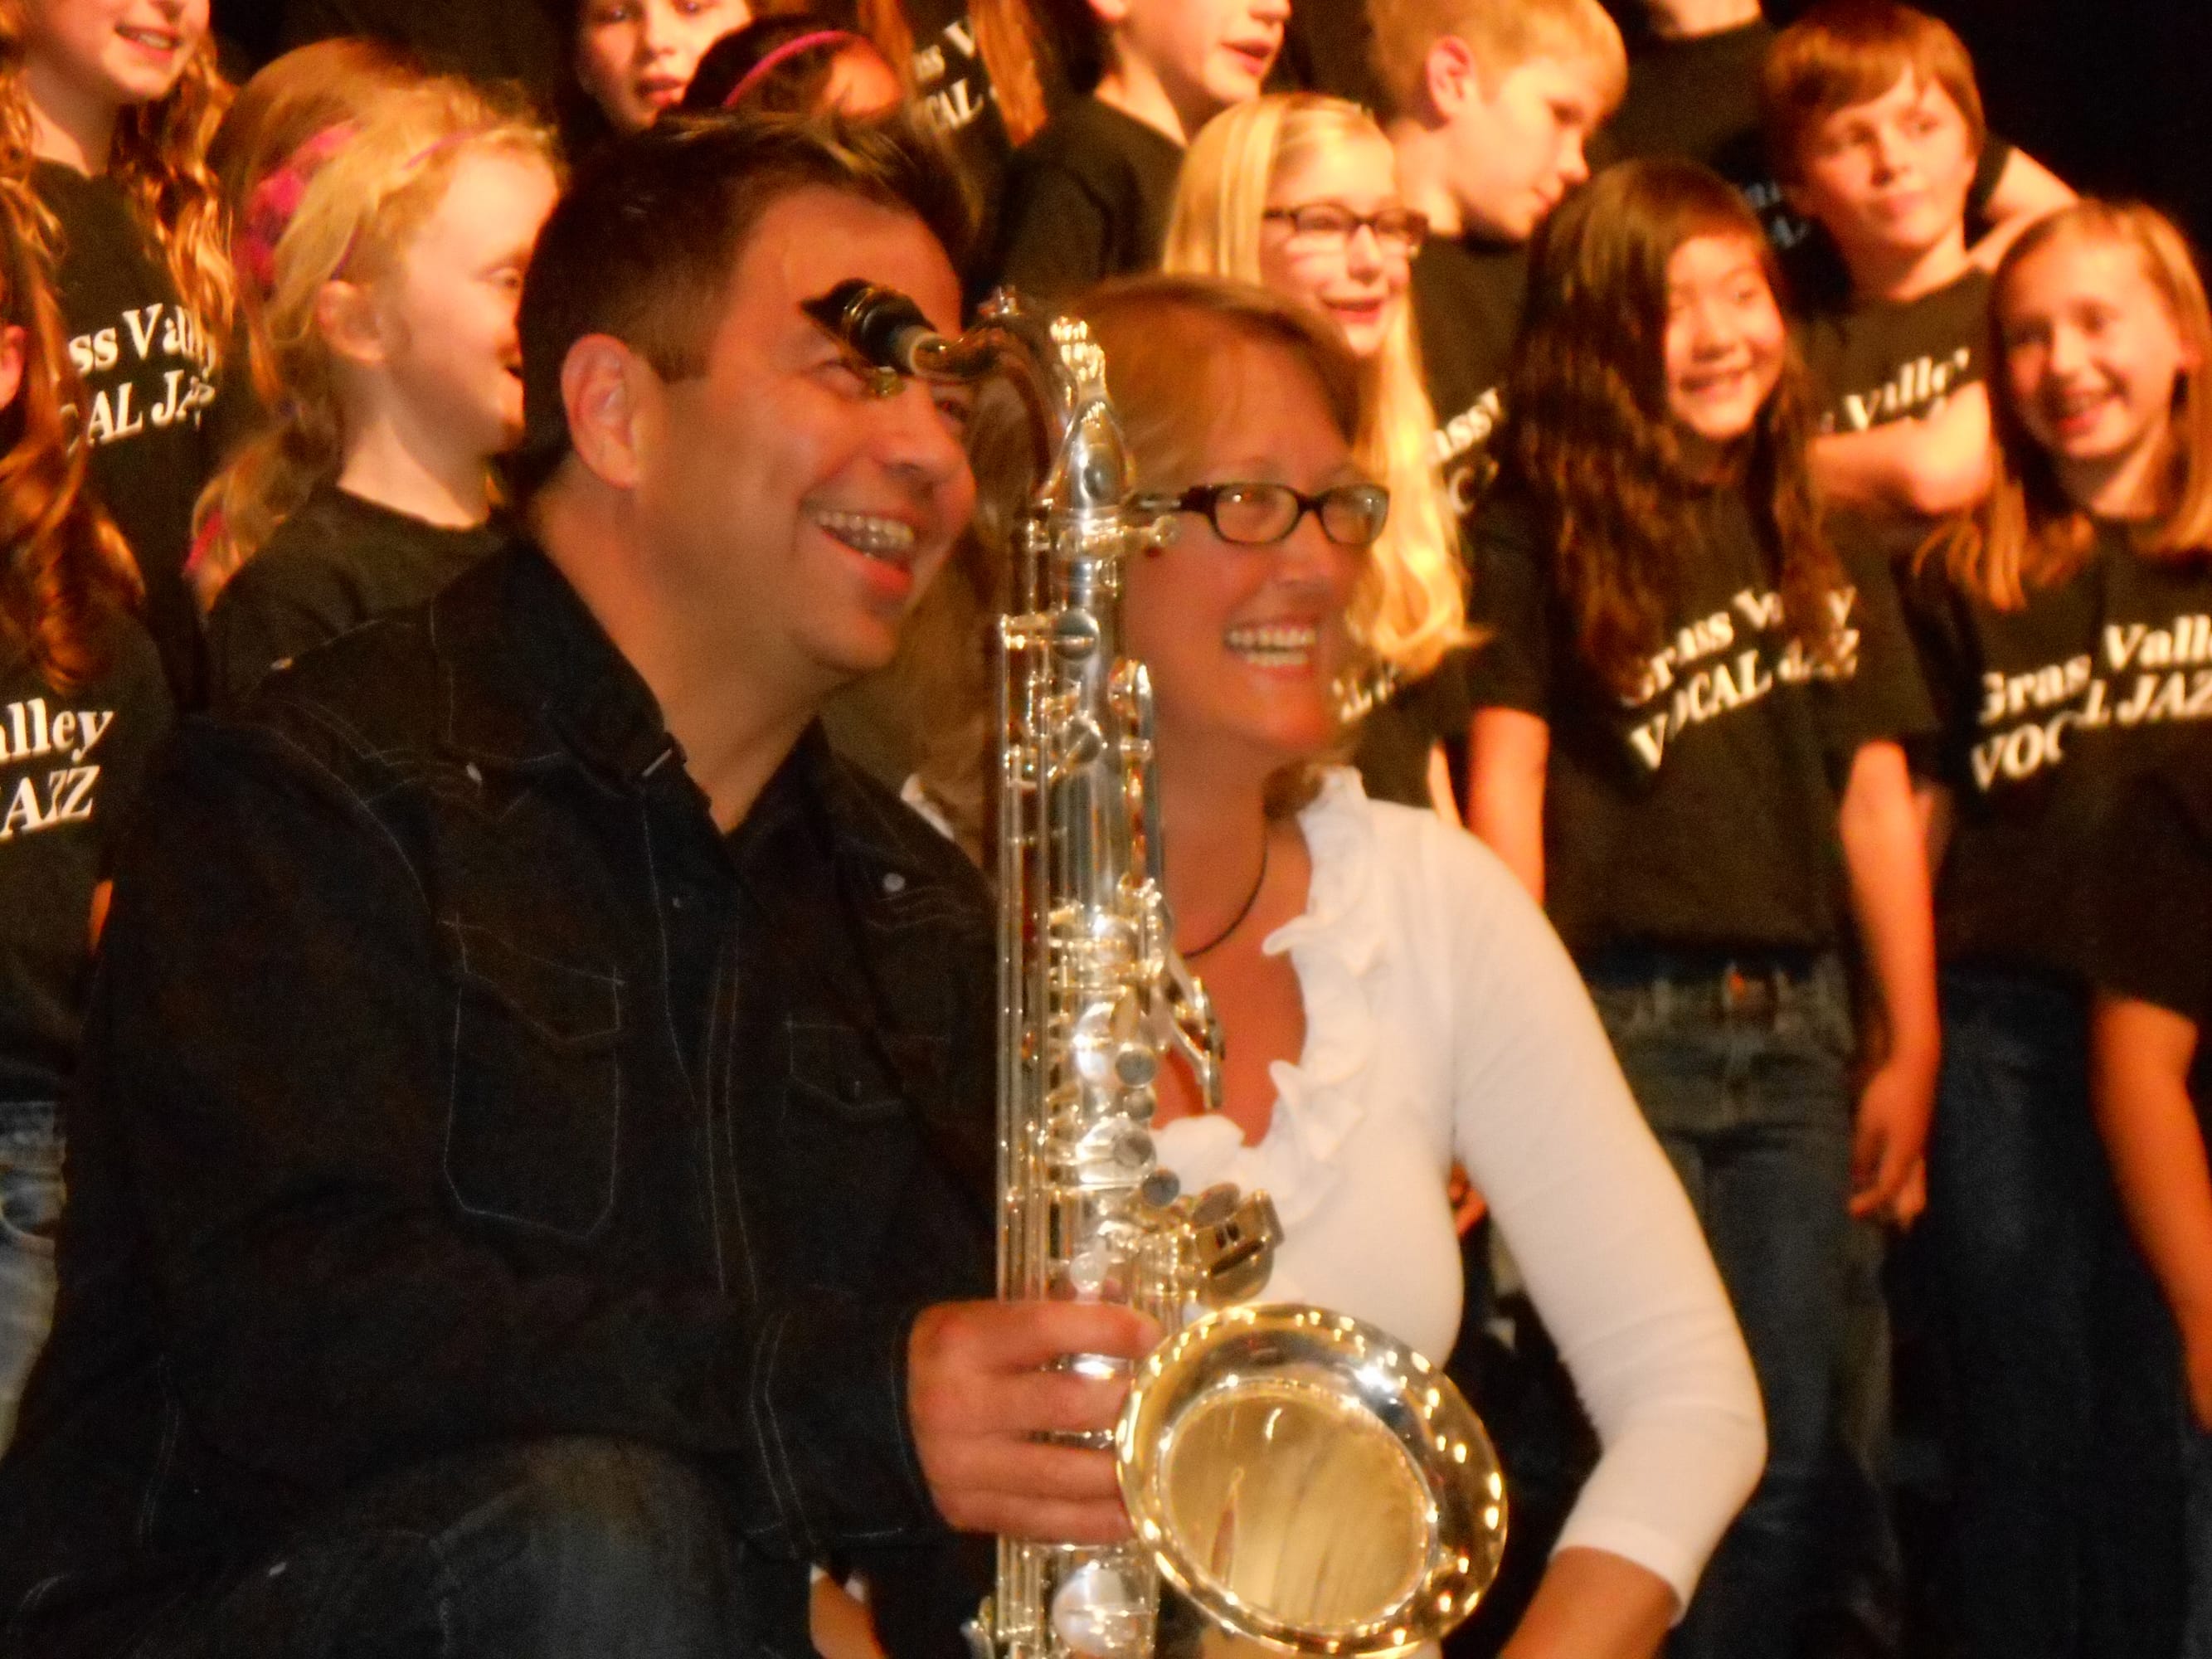 Camas: Jazz saxophonist Patrick Lamb and Grass Valley Elementary School music teacher Natalie Wilson smile at the audience at Lamb's May 28 performance with the school's vocal jazz group.